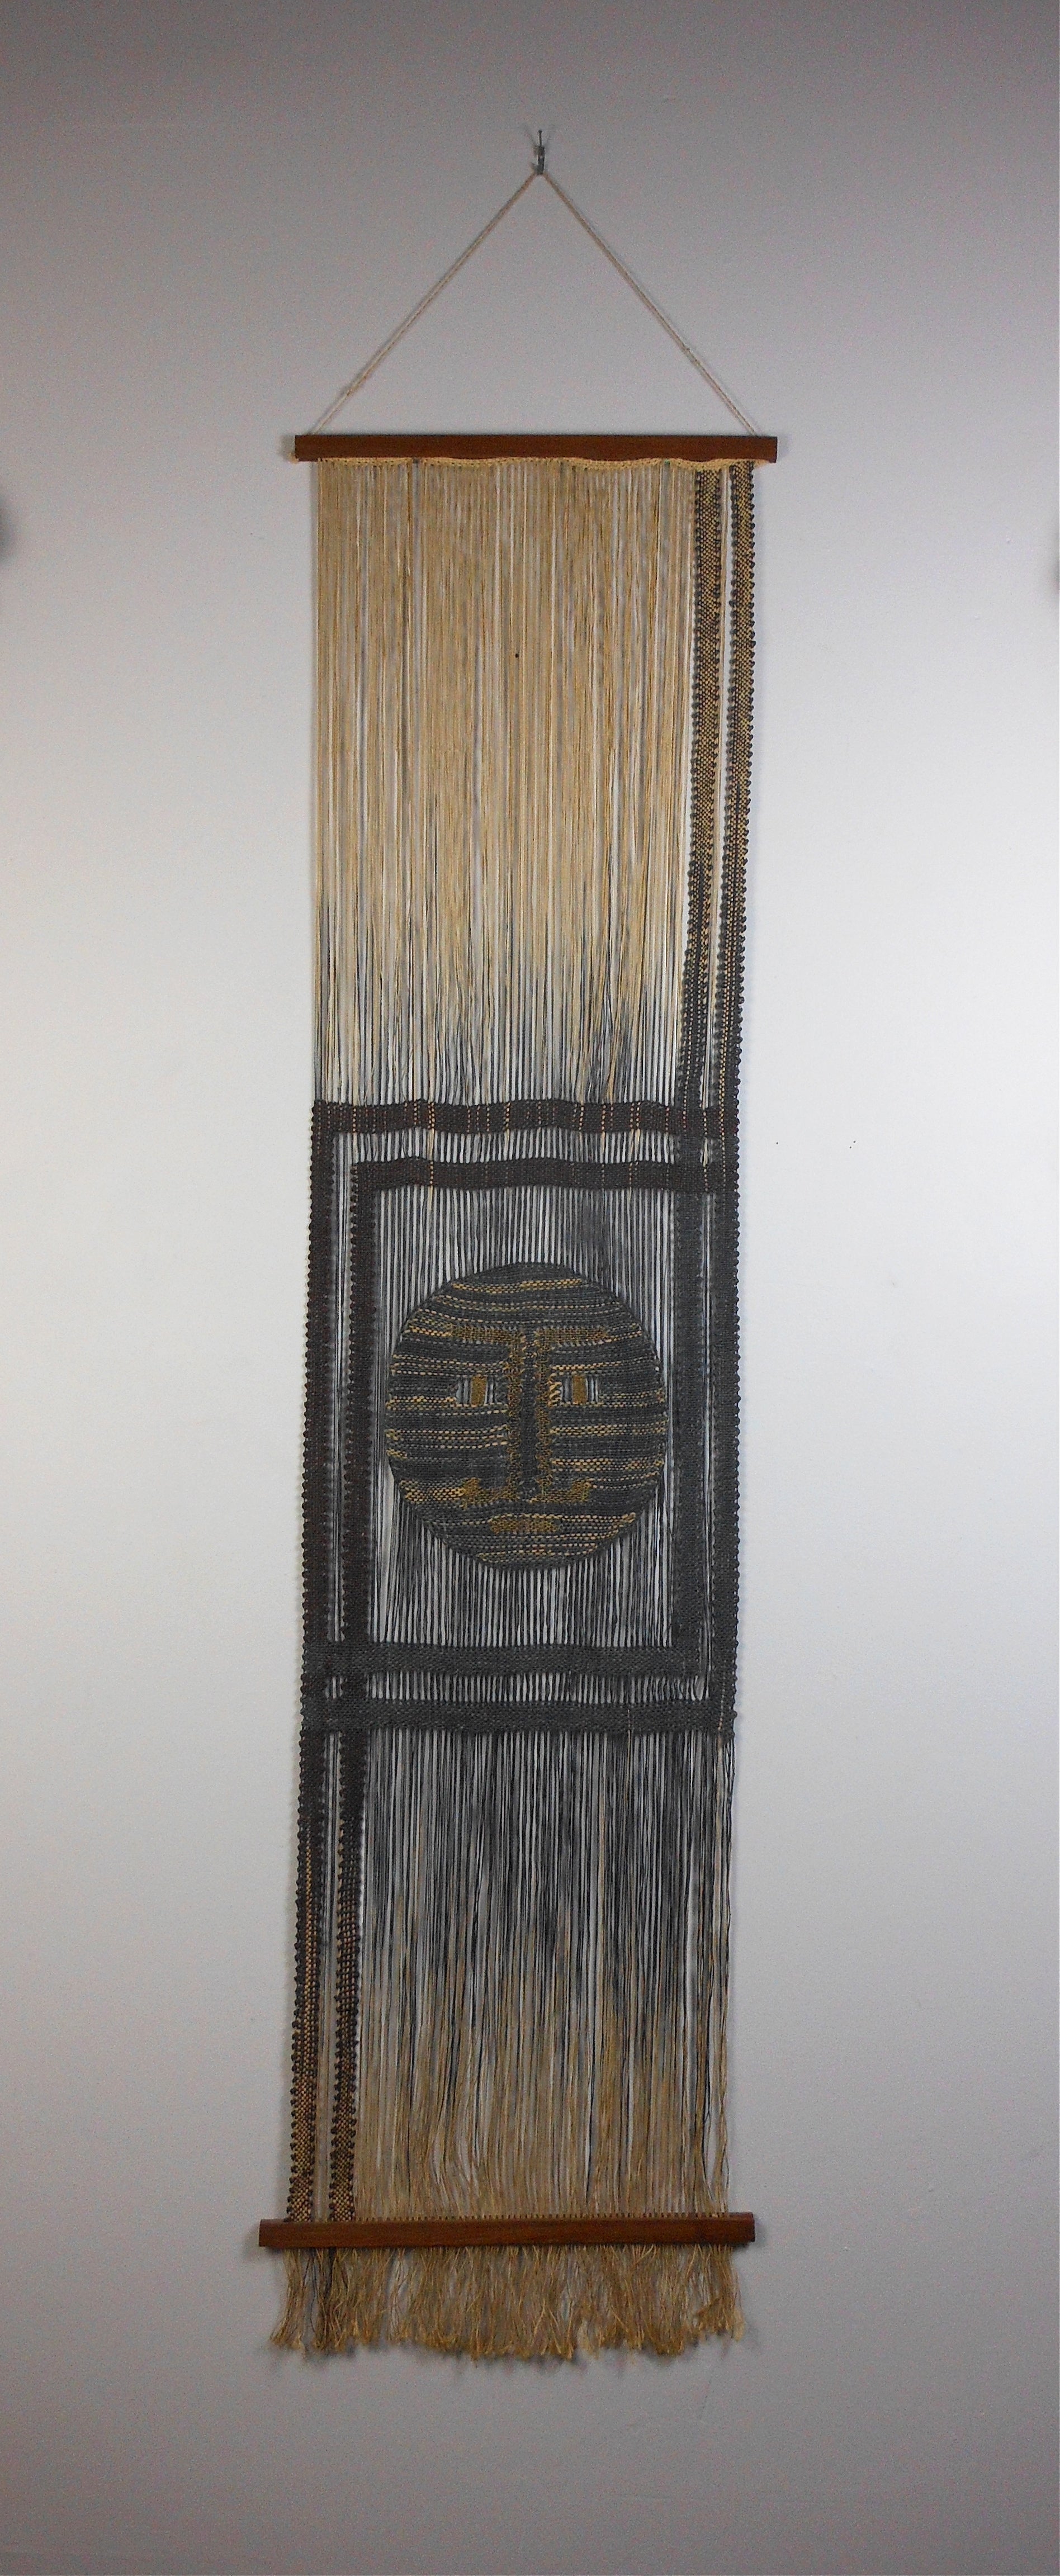 A Woven Wall Hanging